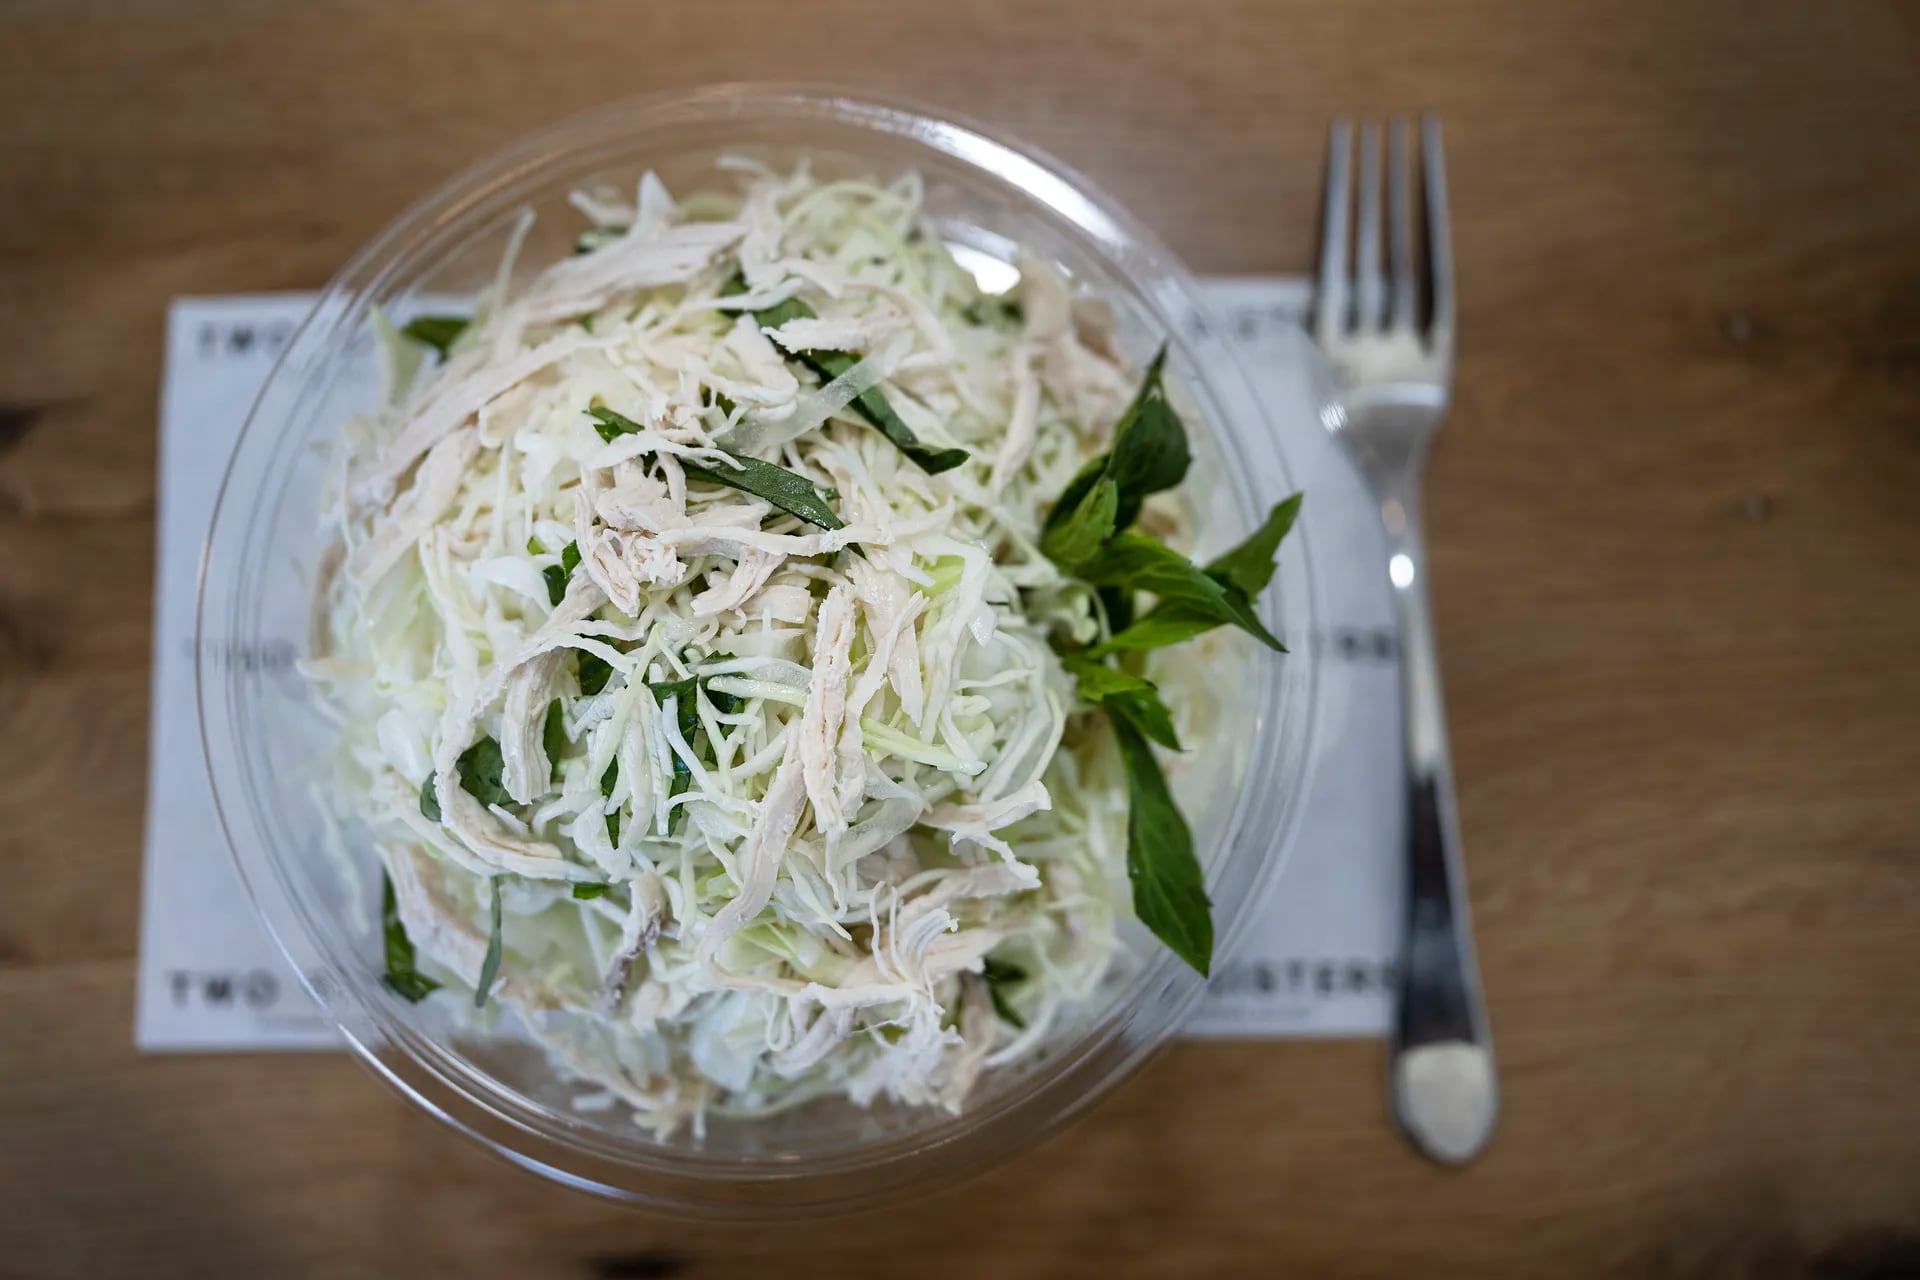 The goi ga, a shredded cabbage salad, is tossed to order in a lime vinaigrette with pho-poached chicken and Thai basil at Two Sisters Vietnamese Eatery in Ventnor City.